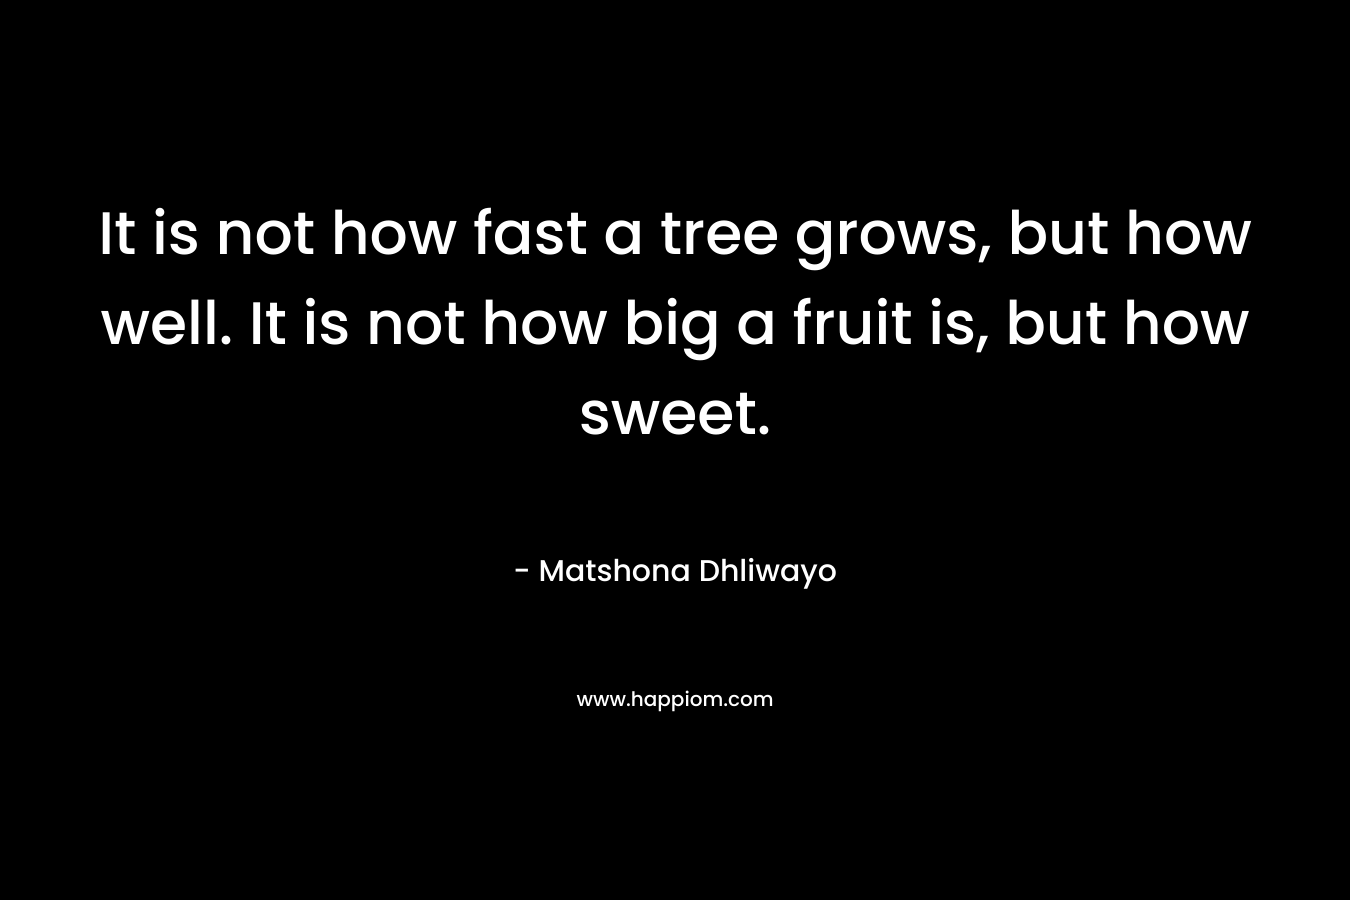 It is not how fast a tree grows, but how well. It is not how big a fruit is, but how sweet.